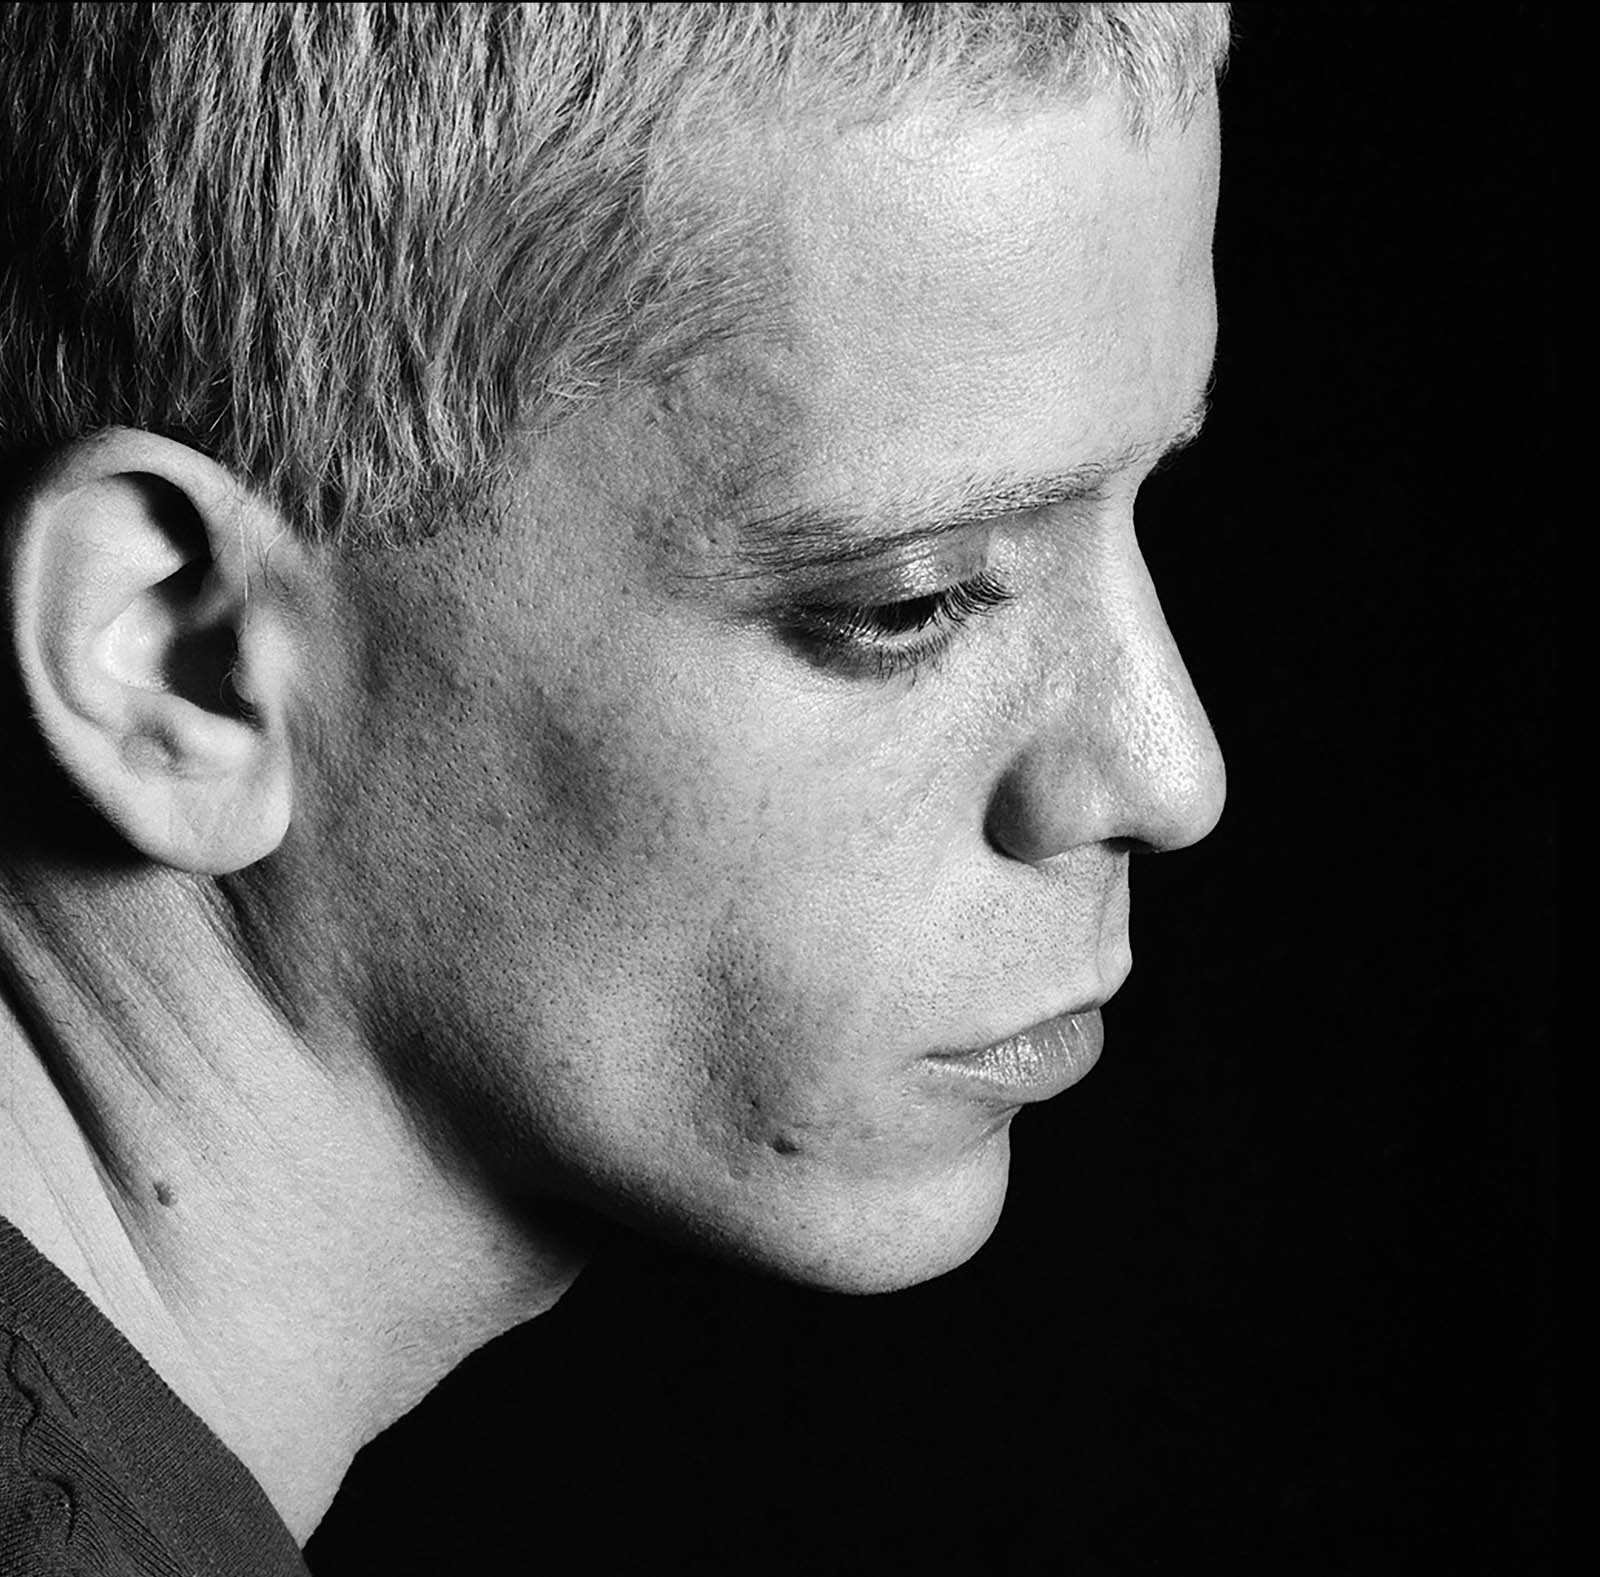 Musician Lou Reed, photographed by Mick Rock